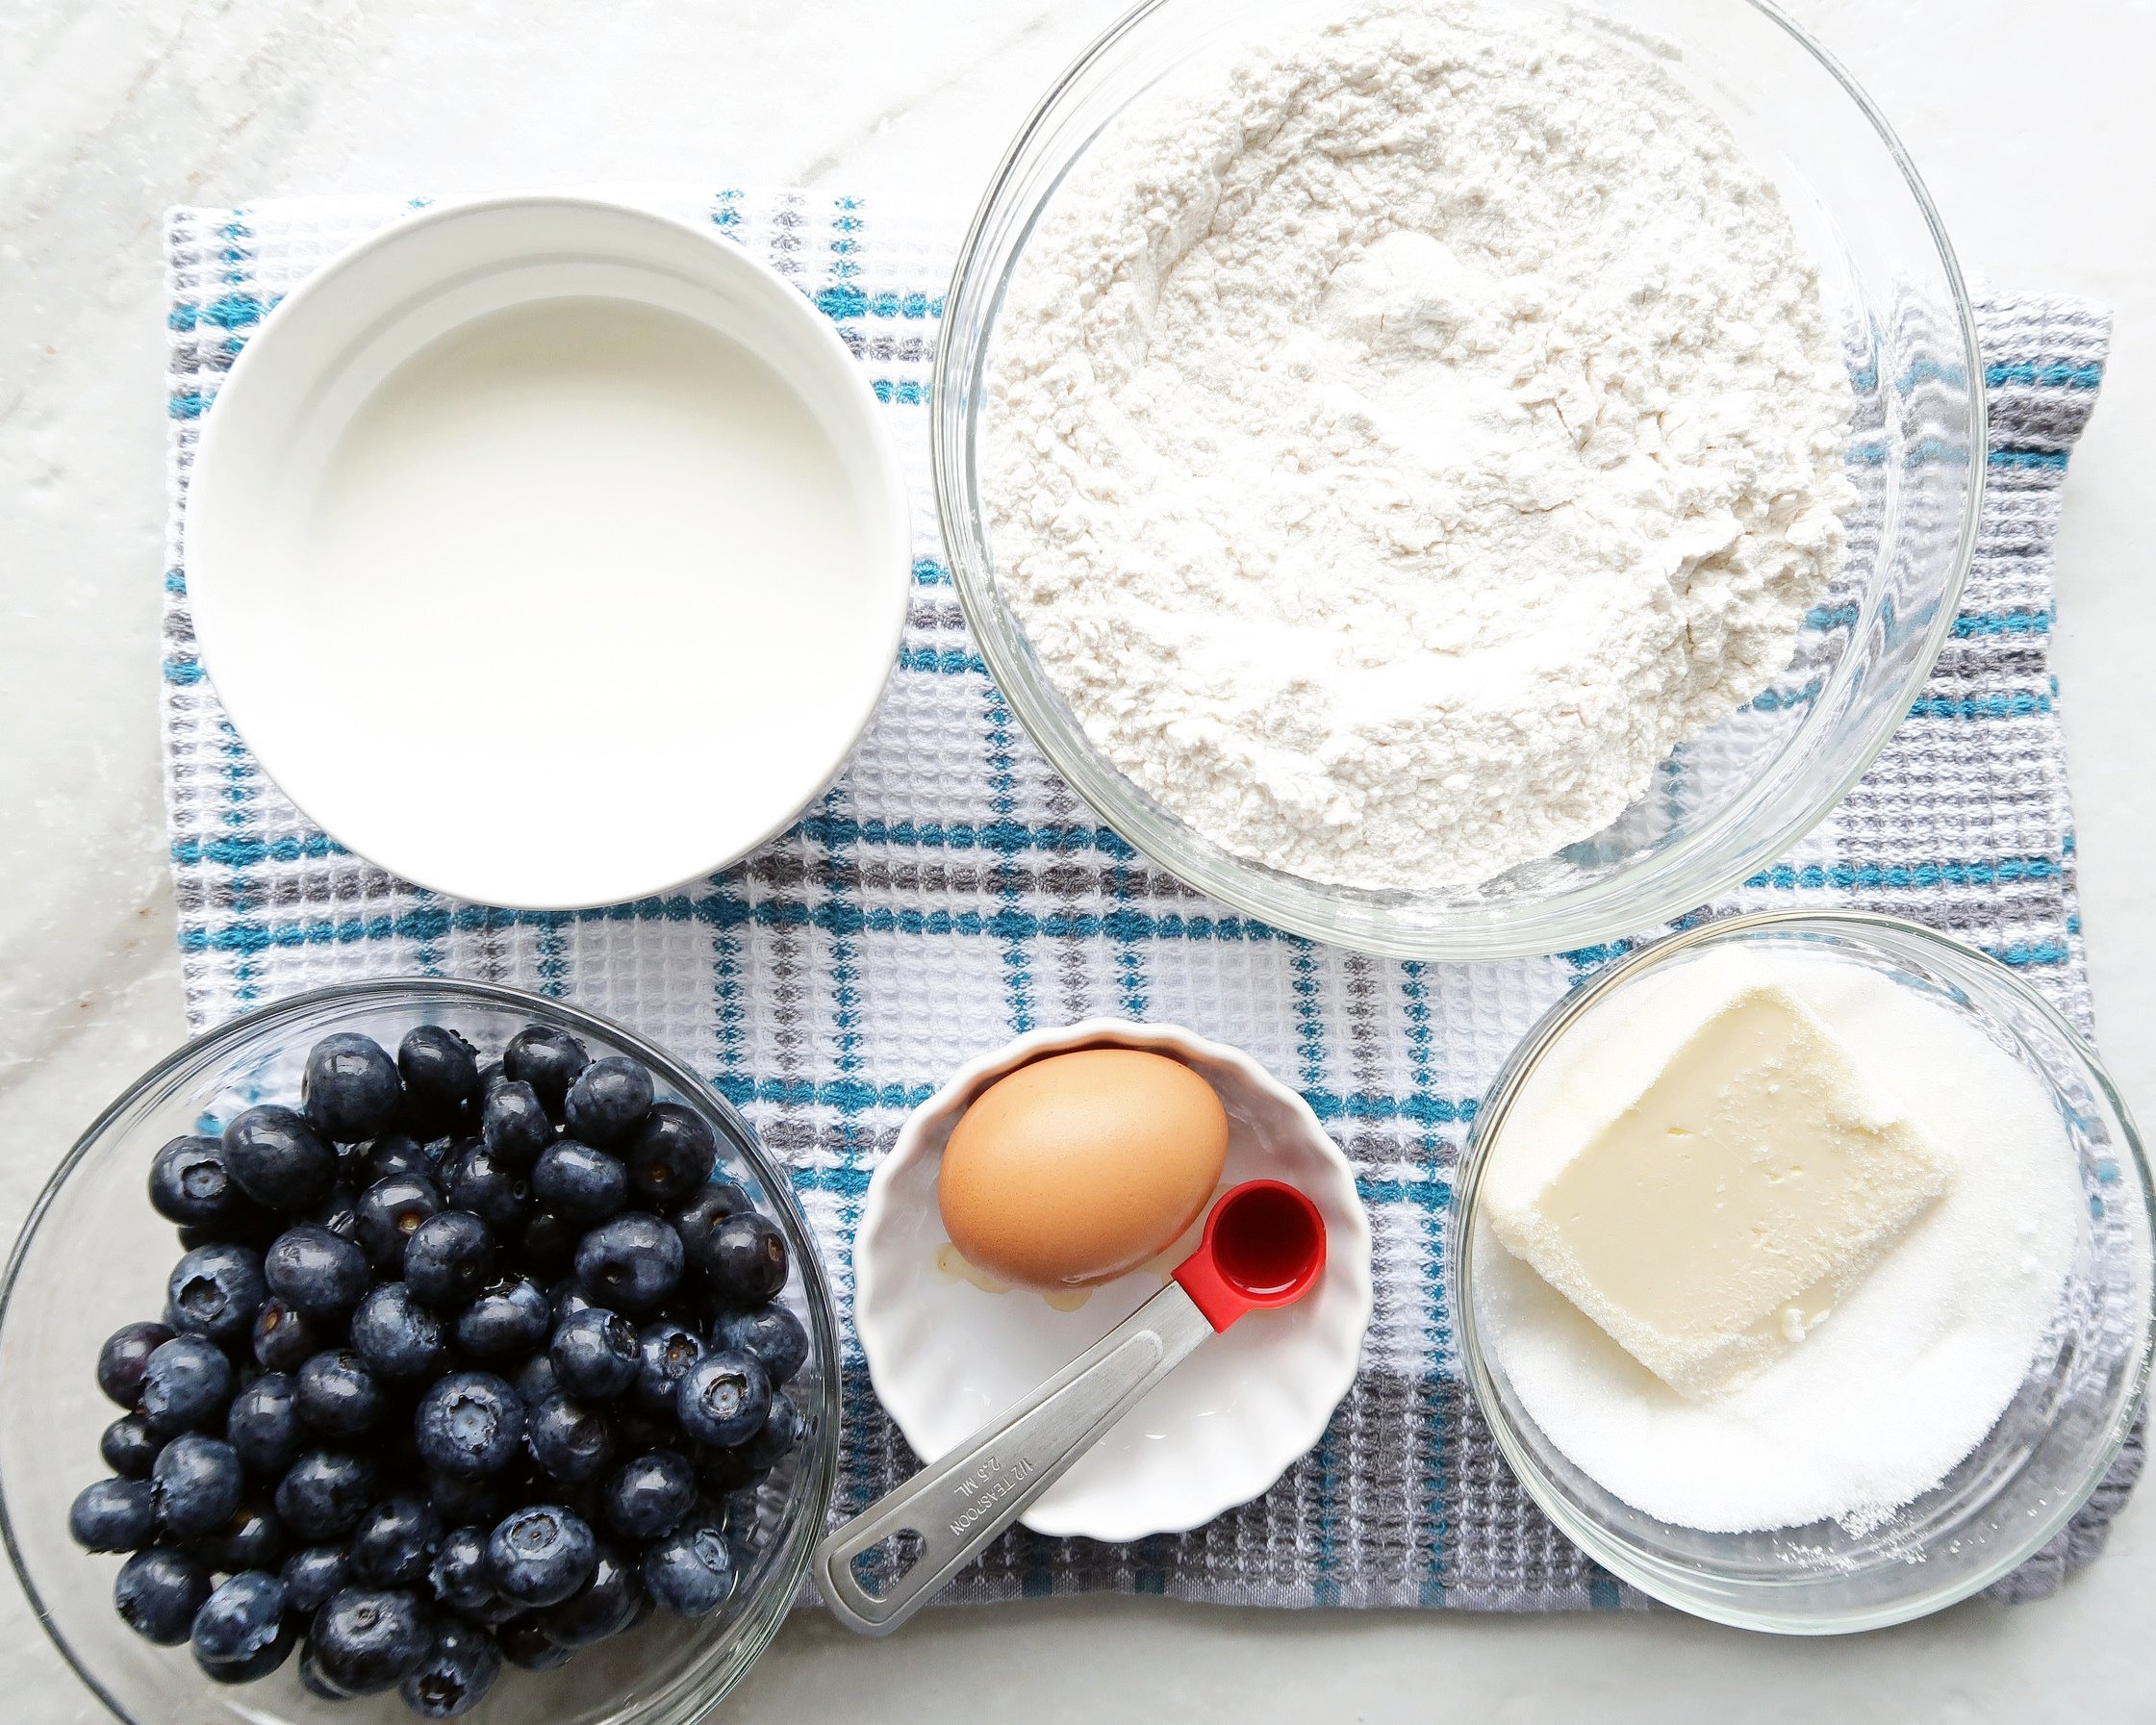 Many bowls containing blueberries, an egg, butter, flour, baking powder, sugar, vanilla,and milk.